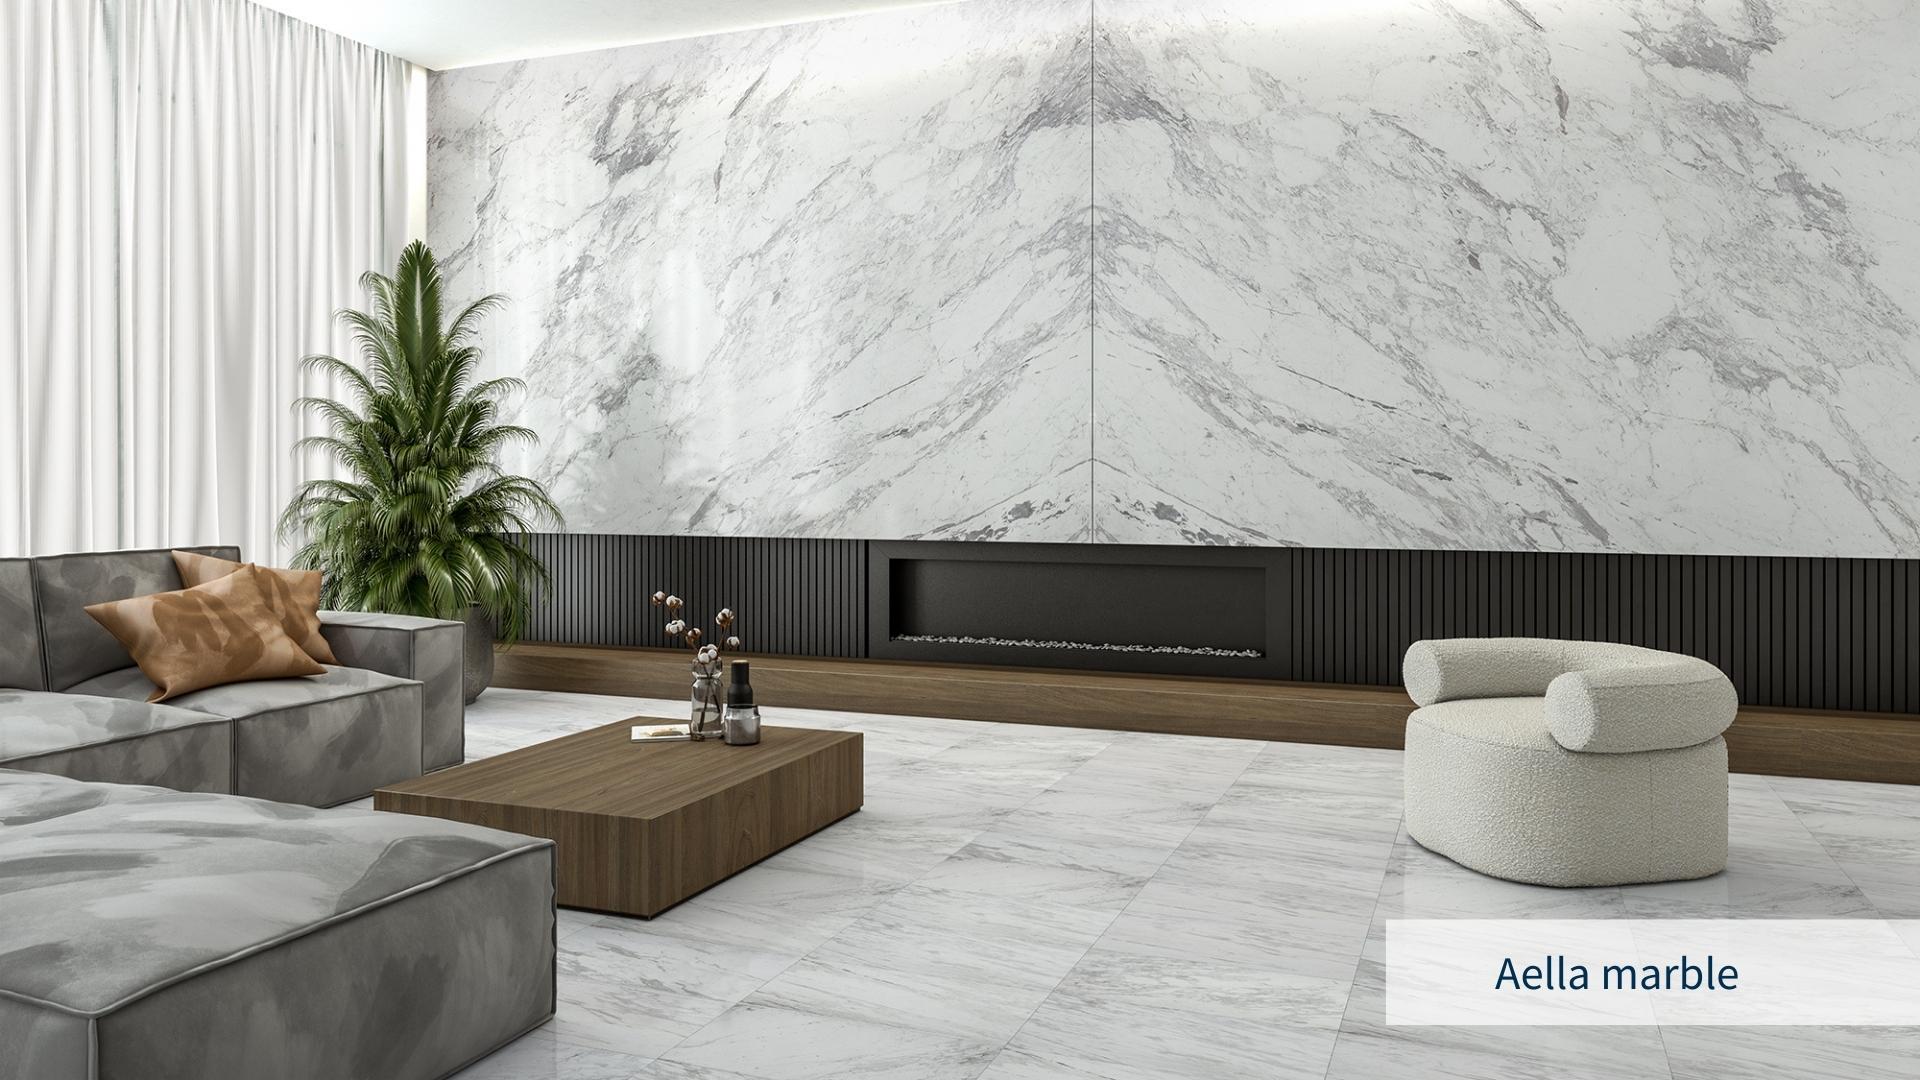 Wall Cladding With Natural Stones And Marble: Smart Solutions For  Architects And Decorators | Stone Group International